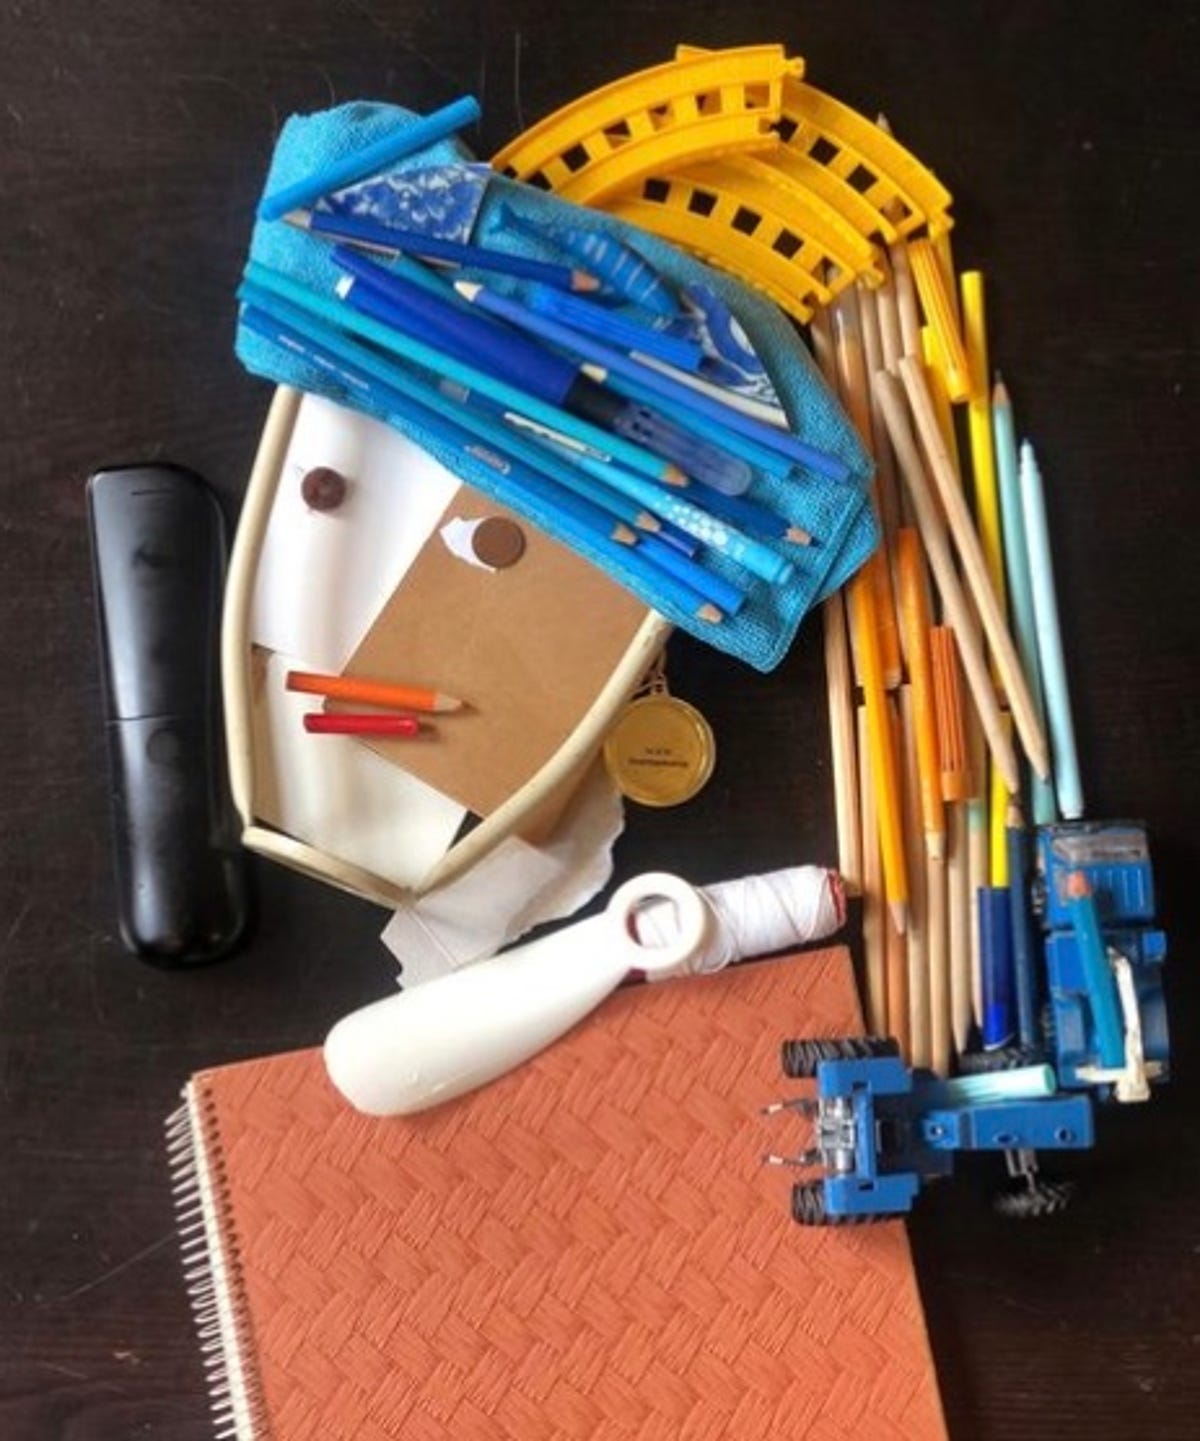 Pencils and other school supplies made in the shape of a girl with pearl earrings